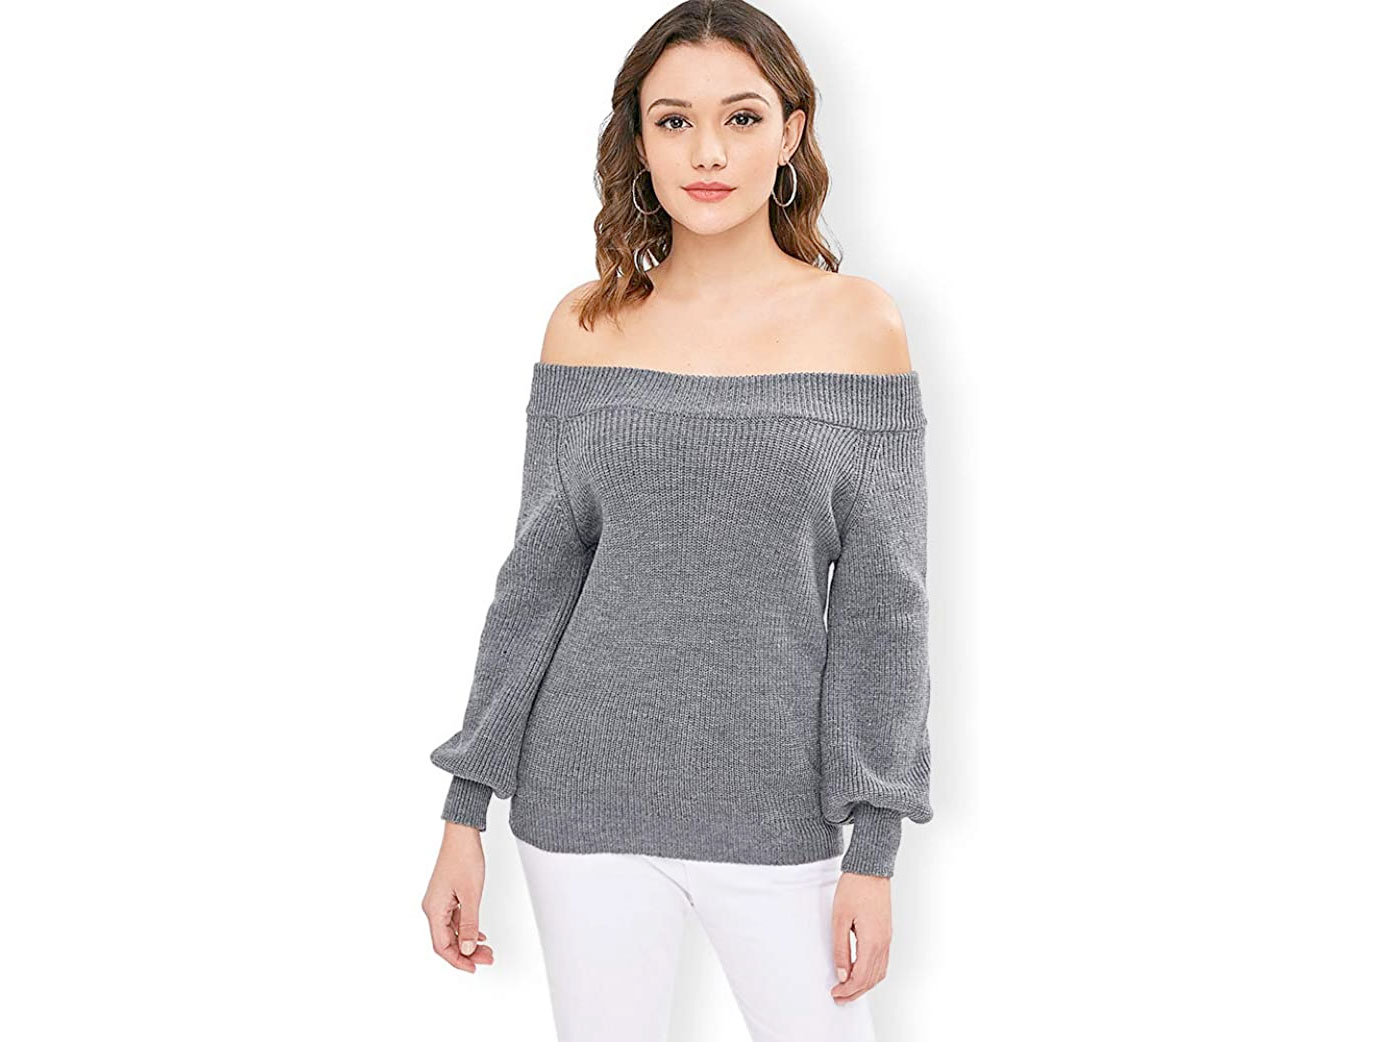 Amazon：女装Off Shoulder Knit Sweater只卖$9.99